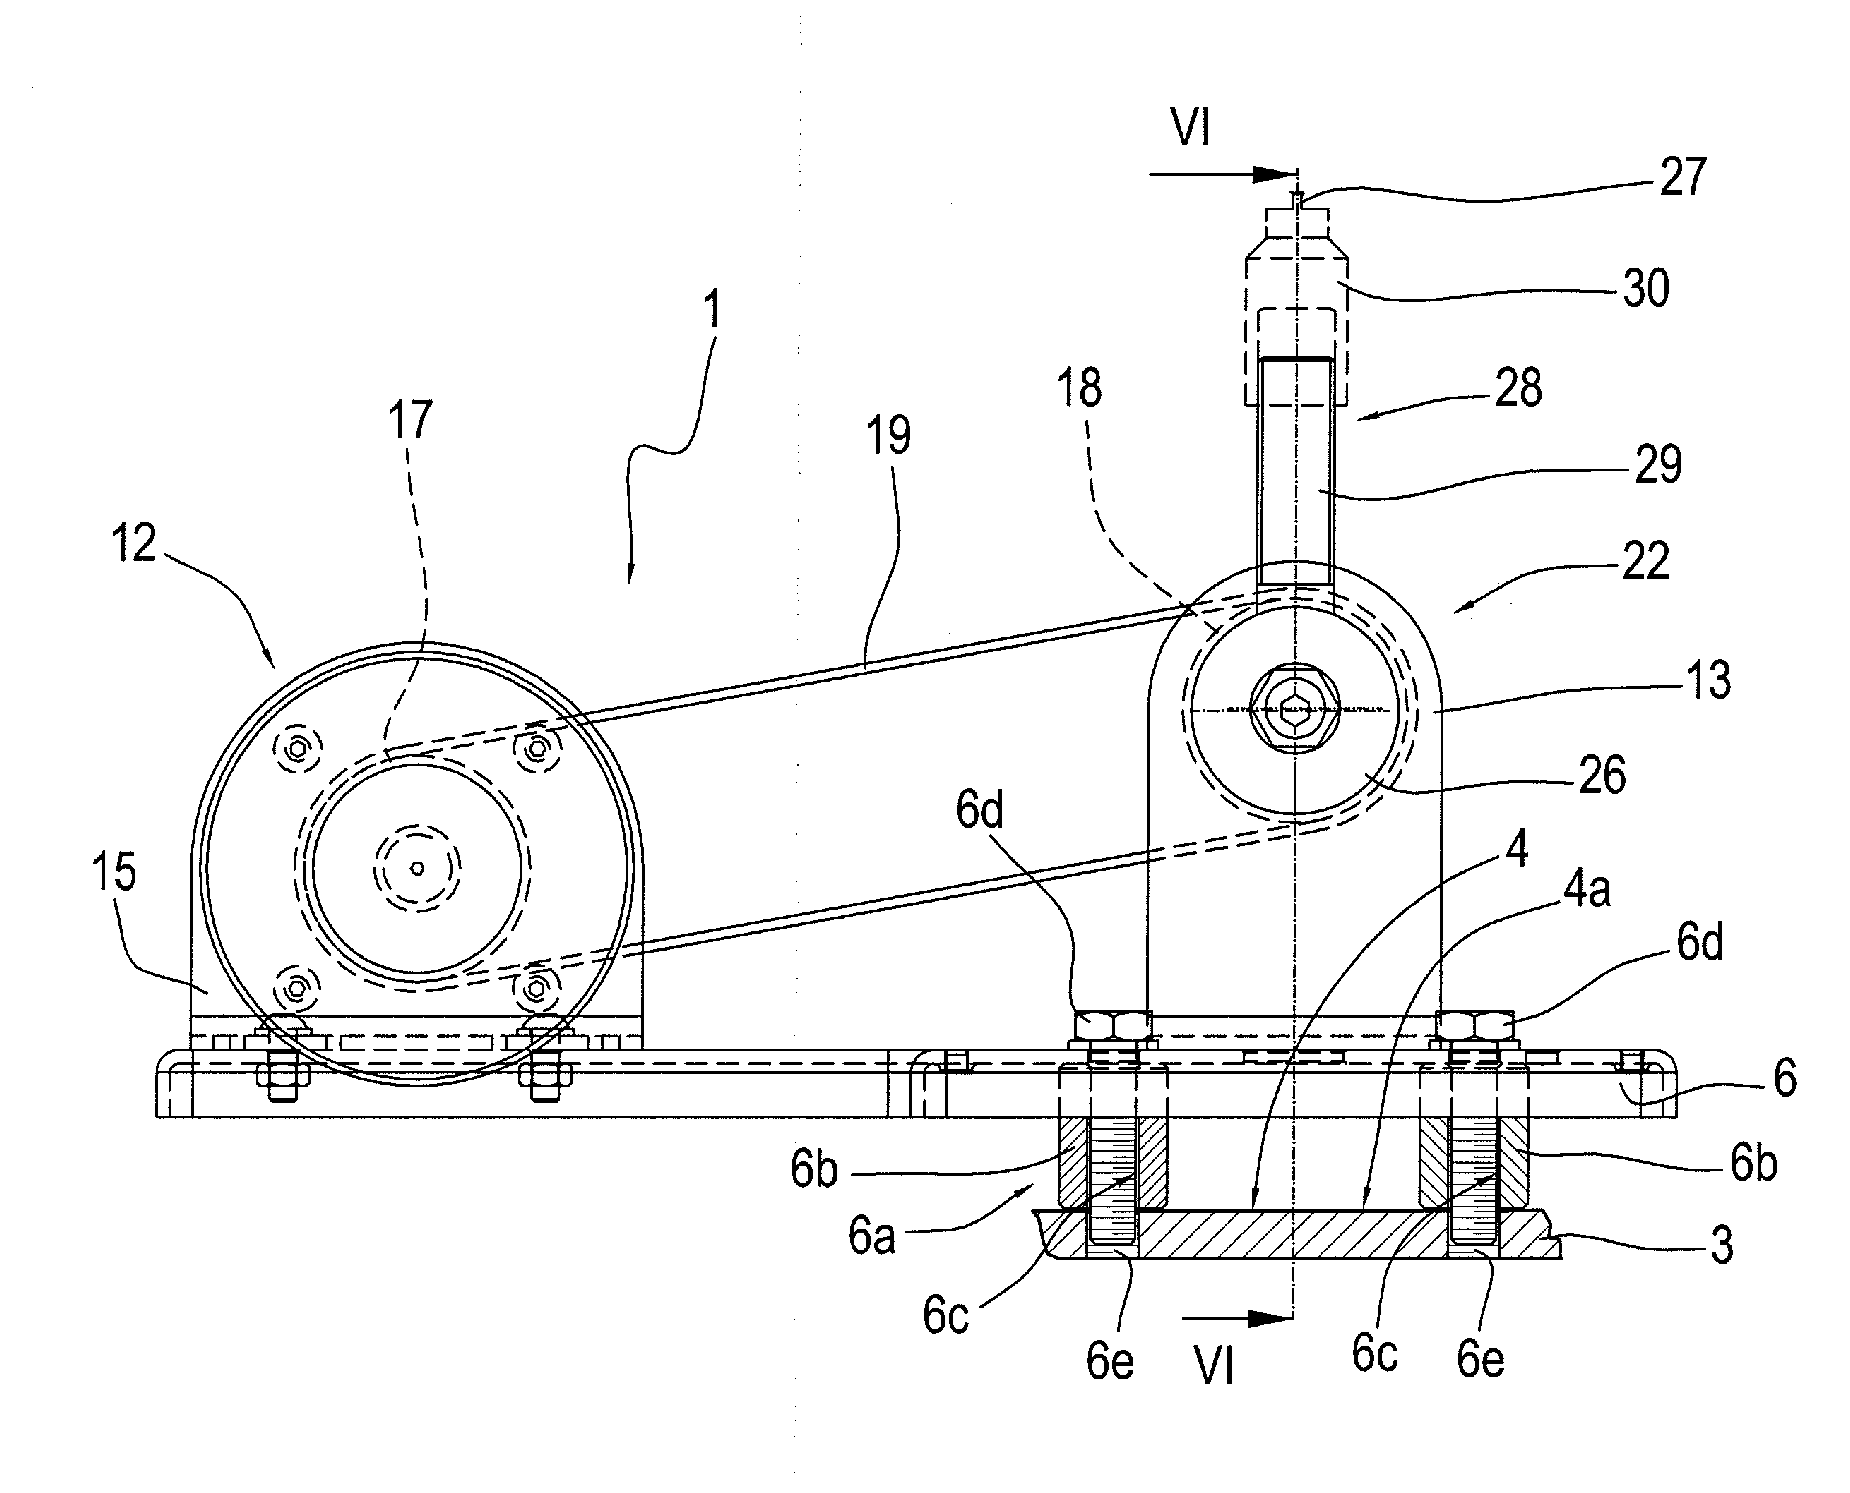 Force modulating device for a gym machine